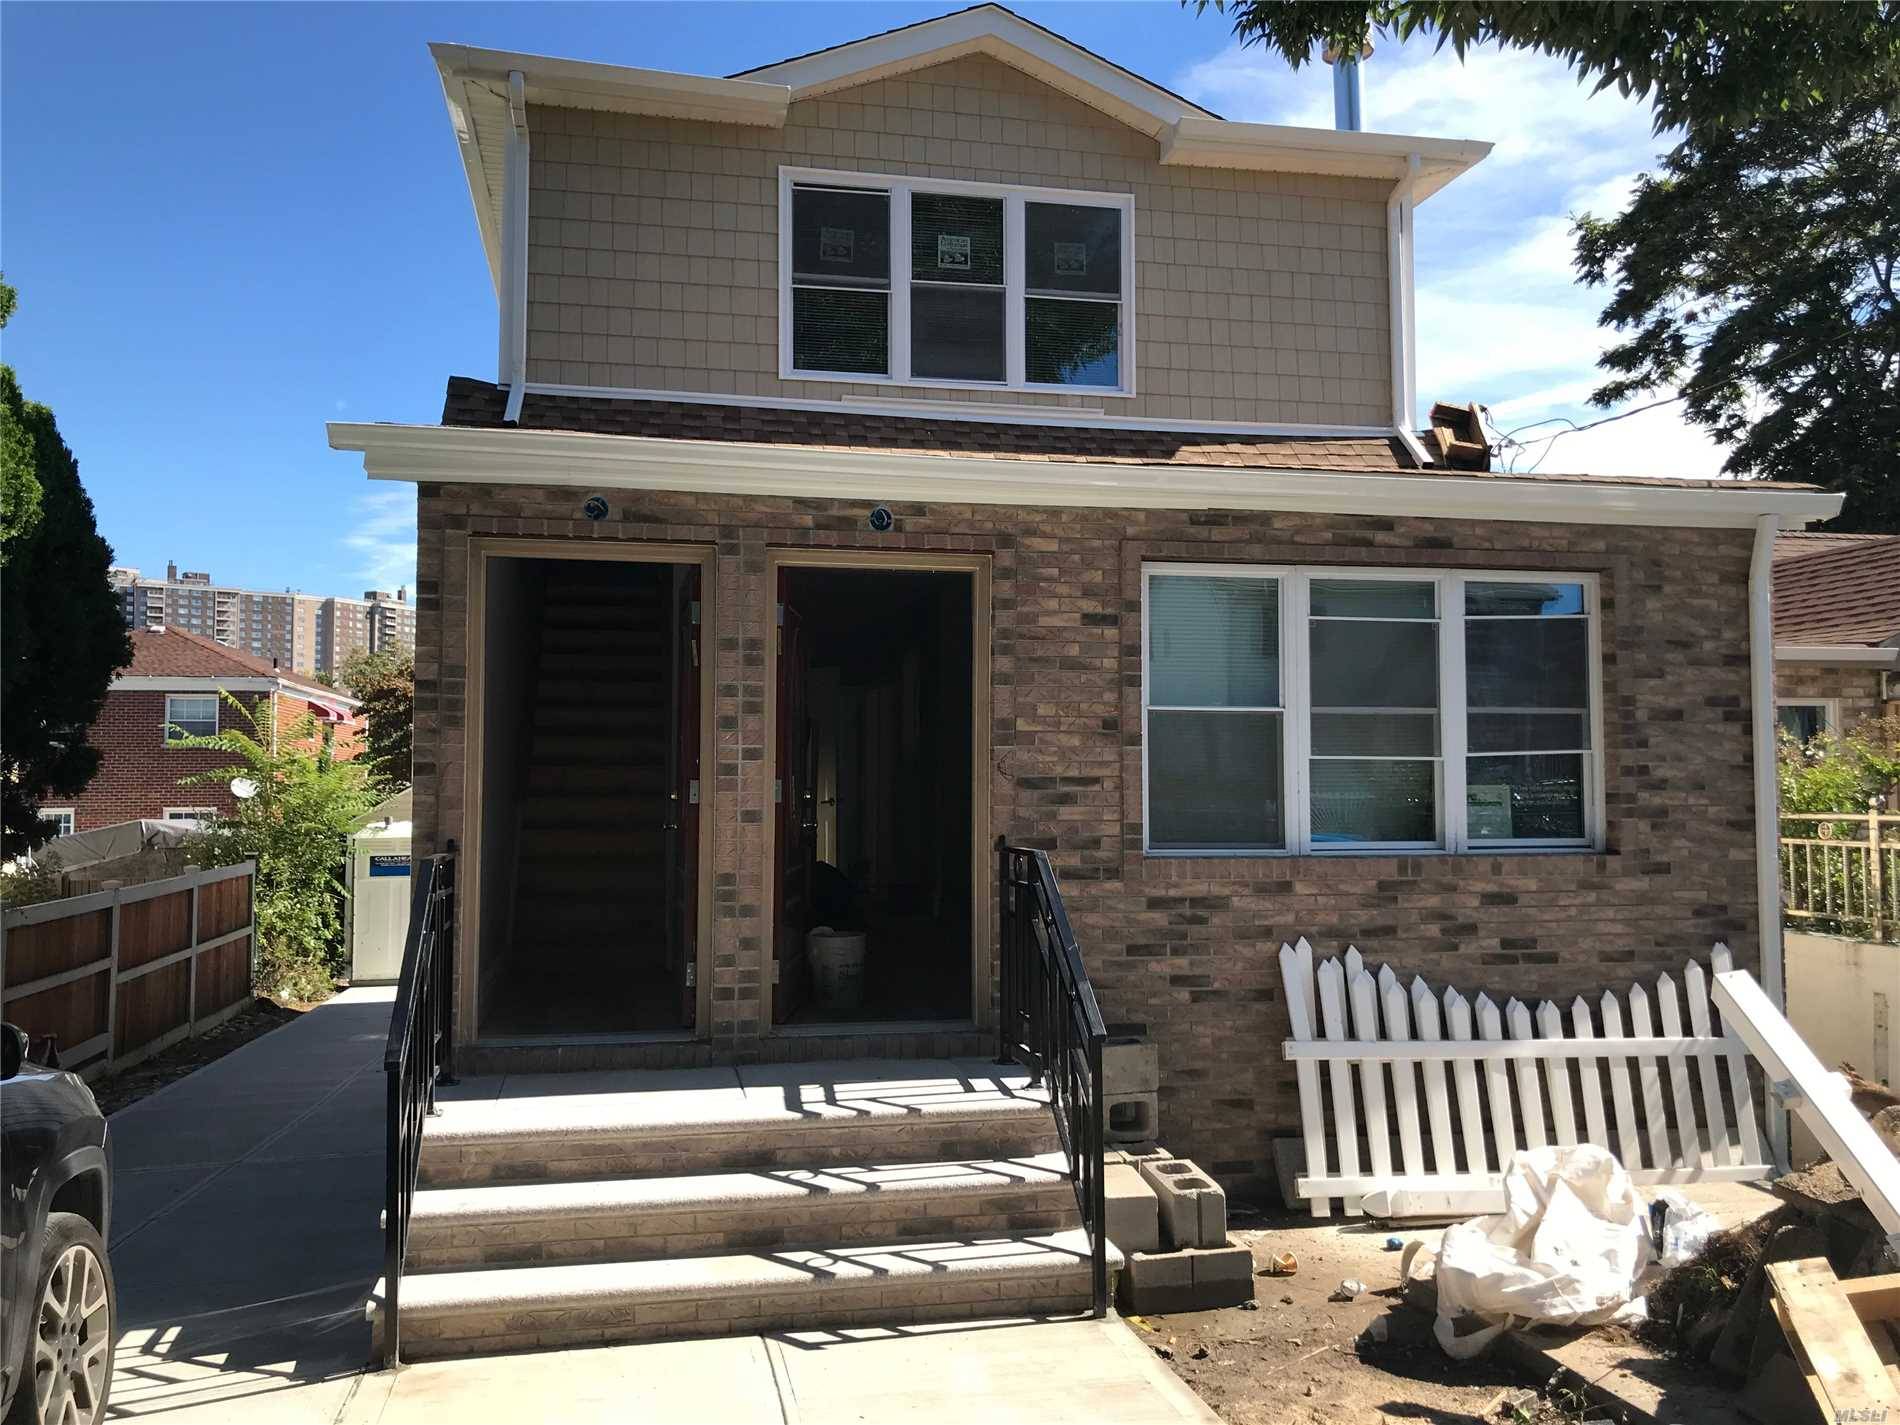 Price Drop ! ! ! Stunning 2 Family Home Newly Renovated From Top To Bottom 6 Bedrooms 3X3 3 Full Bathrooms Finished Basement Private Driveway 1 Car Garage A Must ...